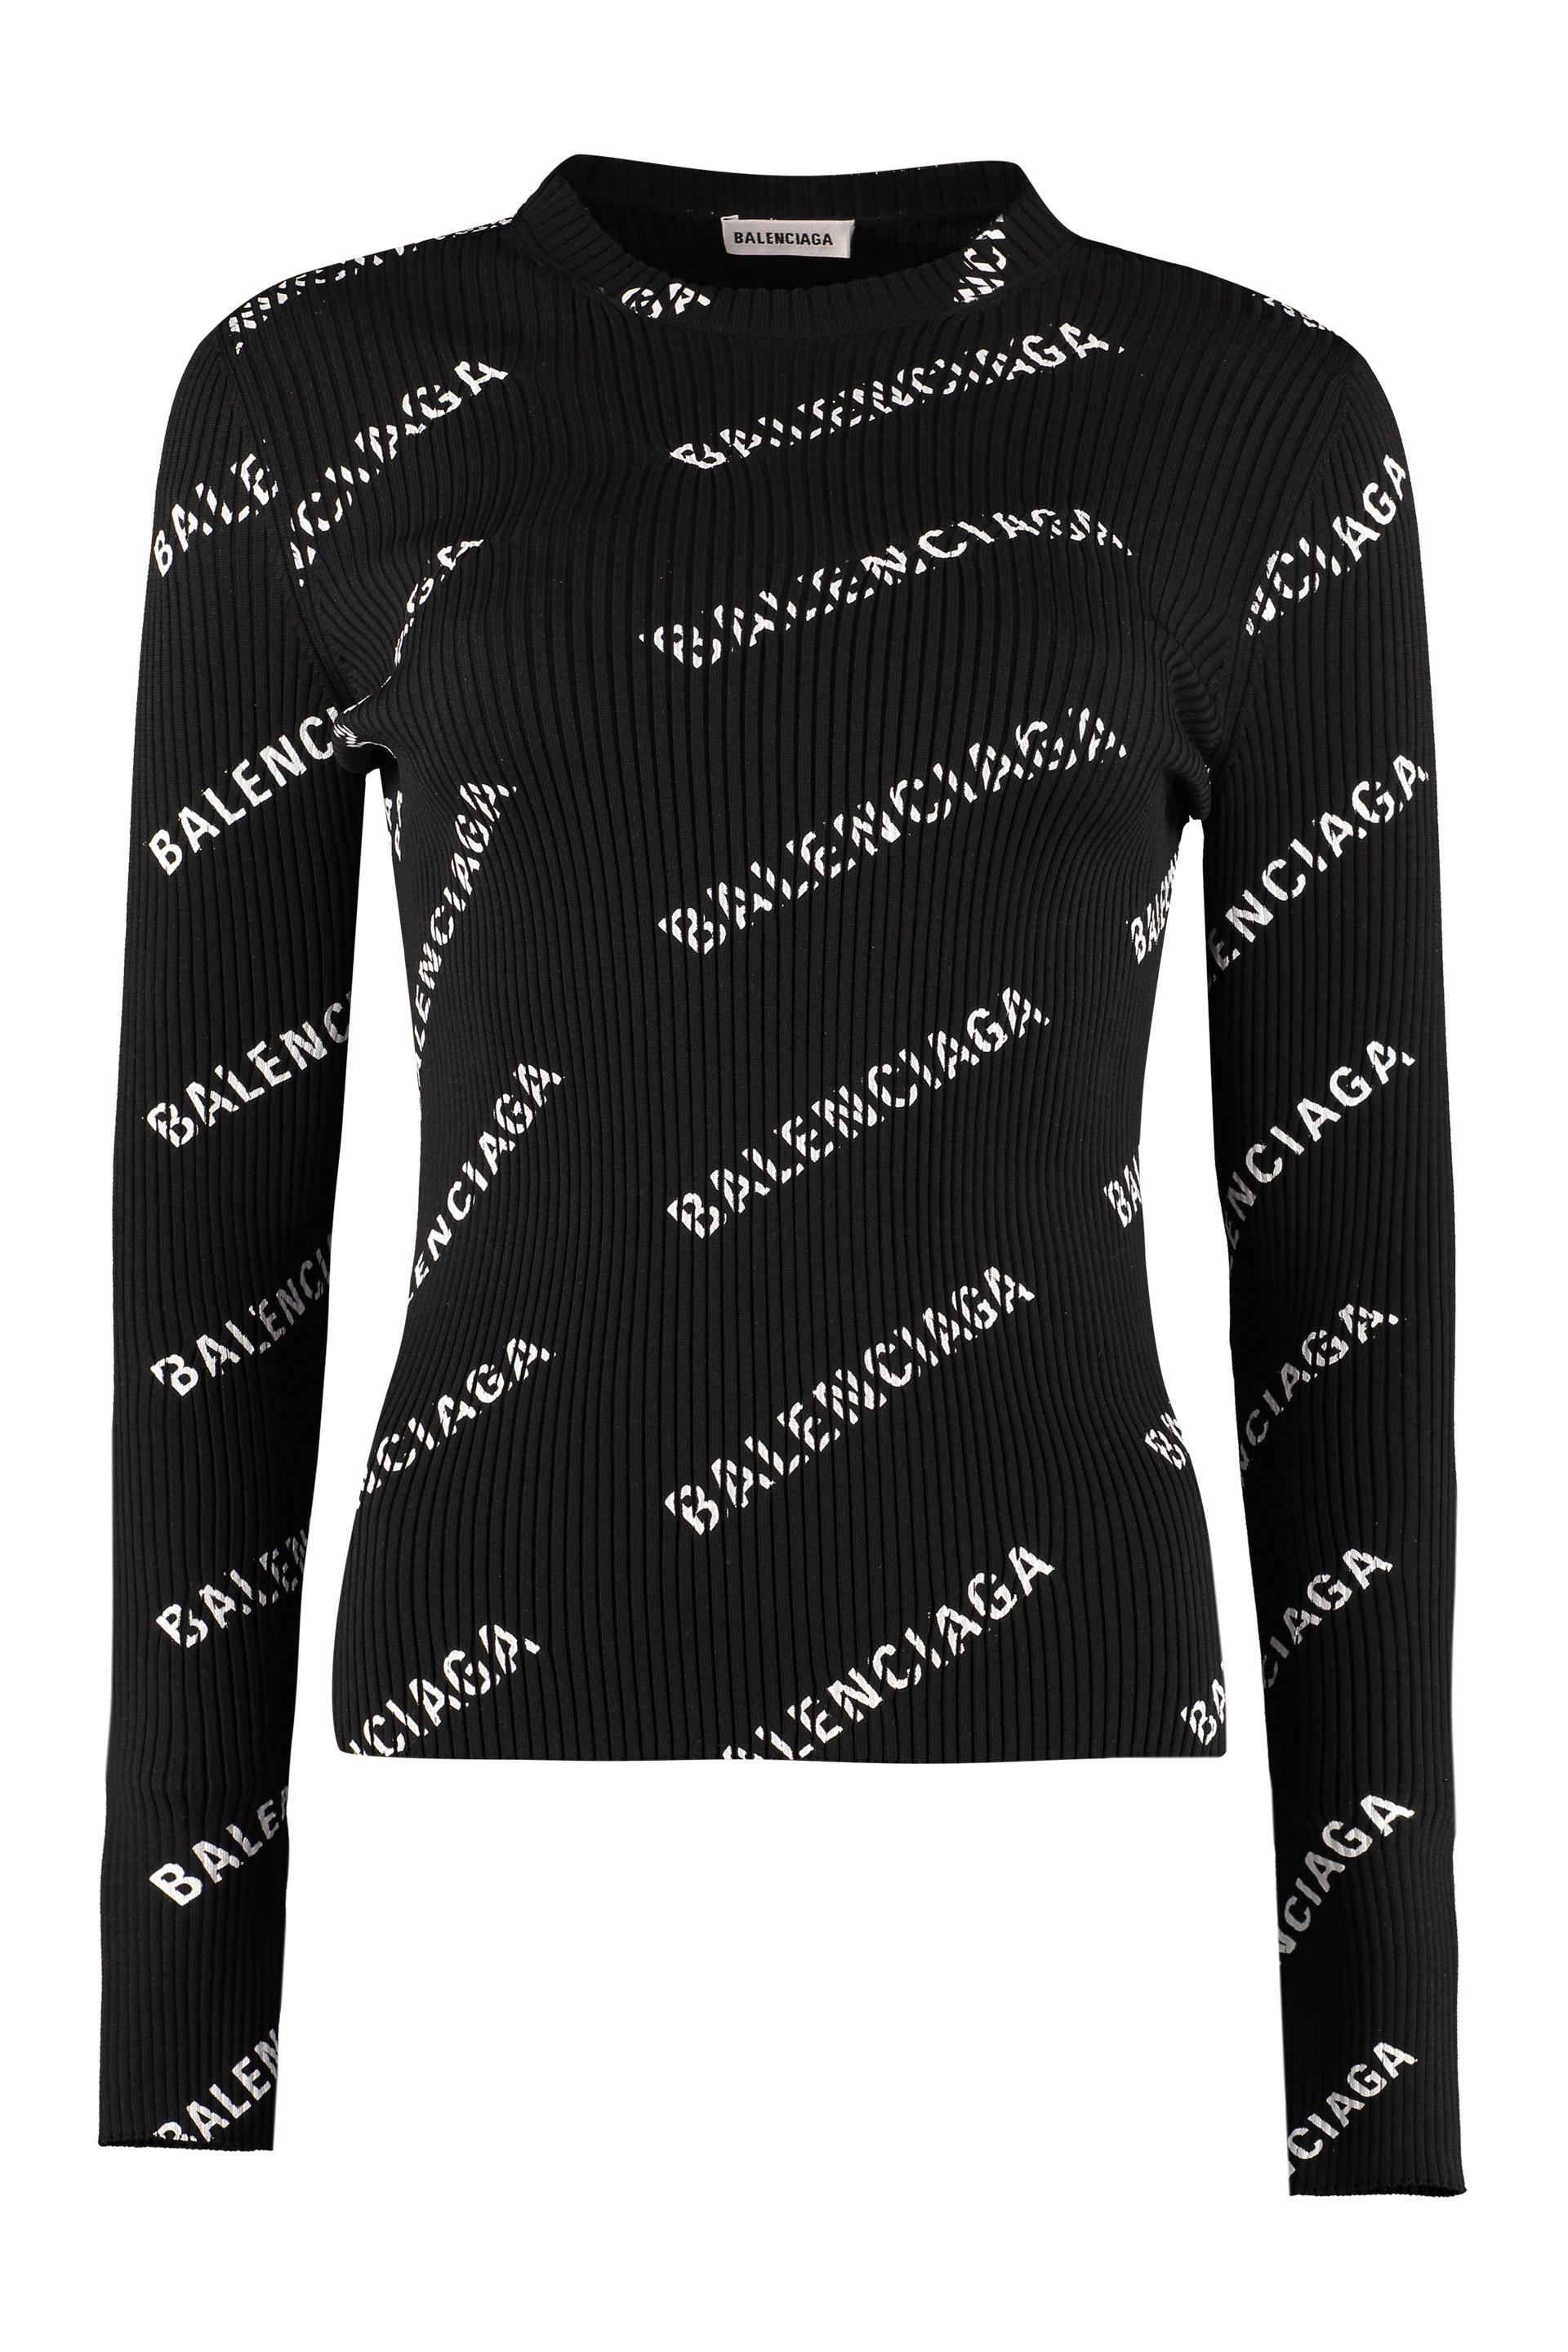 Balenciaga Printed Ribbed-knit Sweater in Black | Lyst